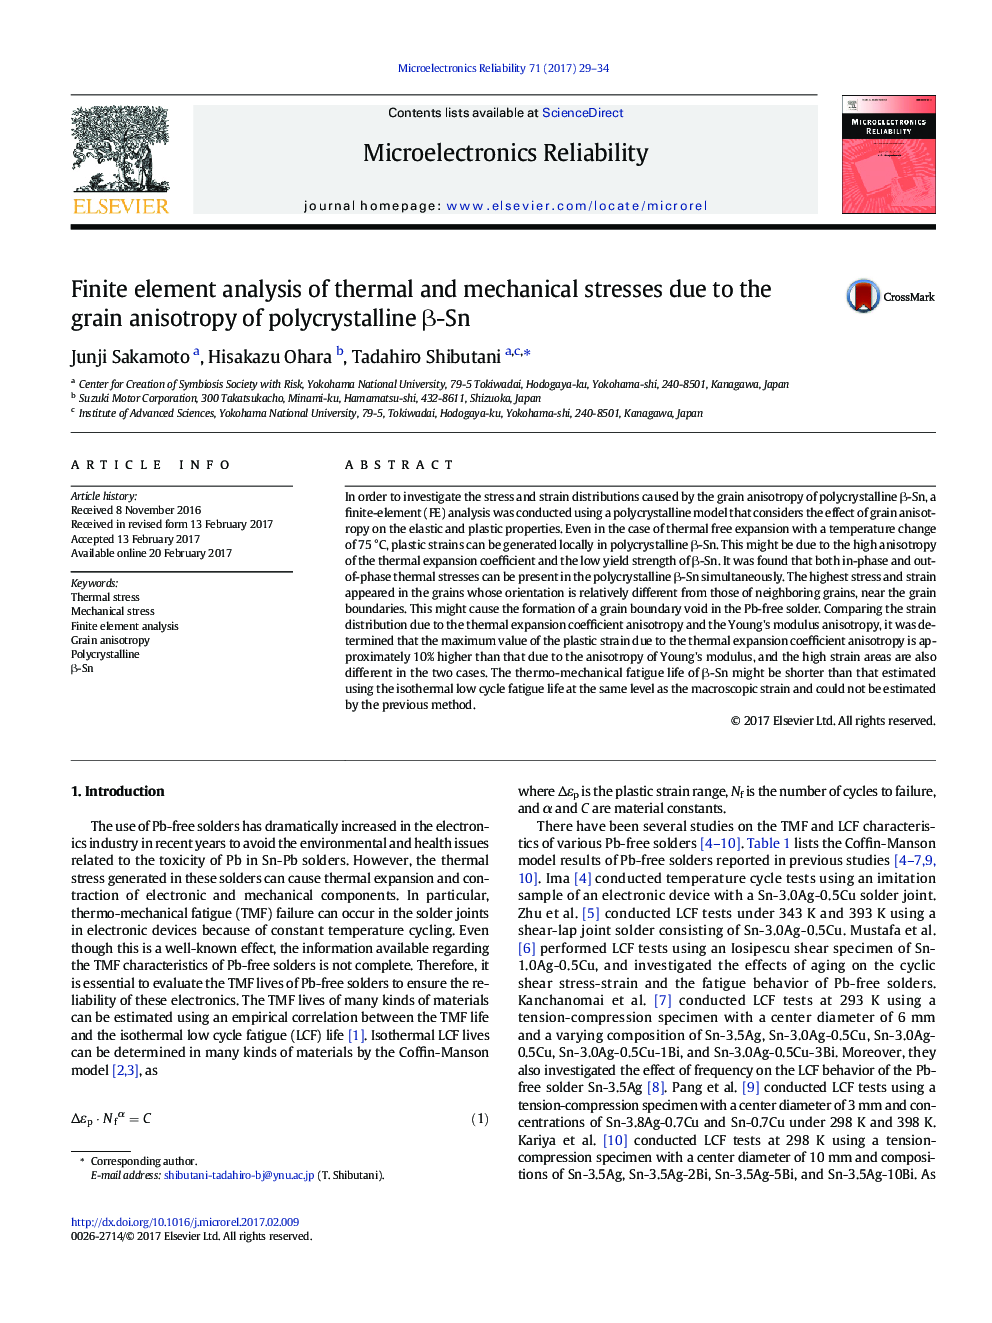 Finite element analysis of thermal and mechanical stresses due to the grain anisotropy of polycrystalline Î²-Sn